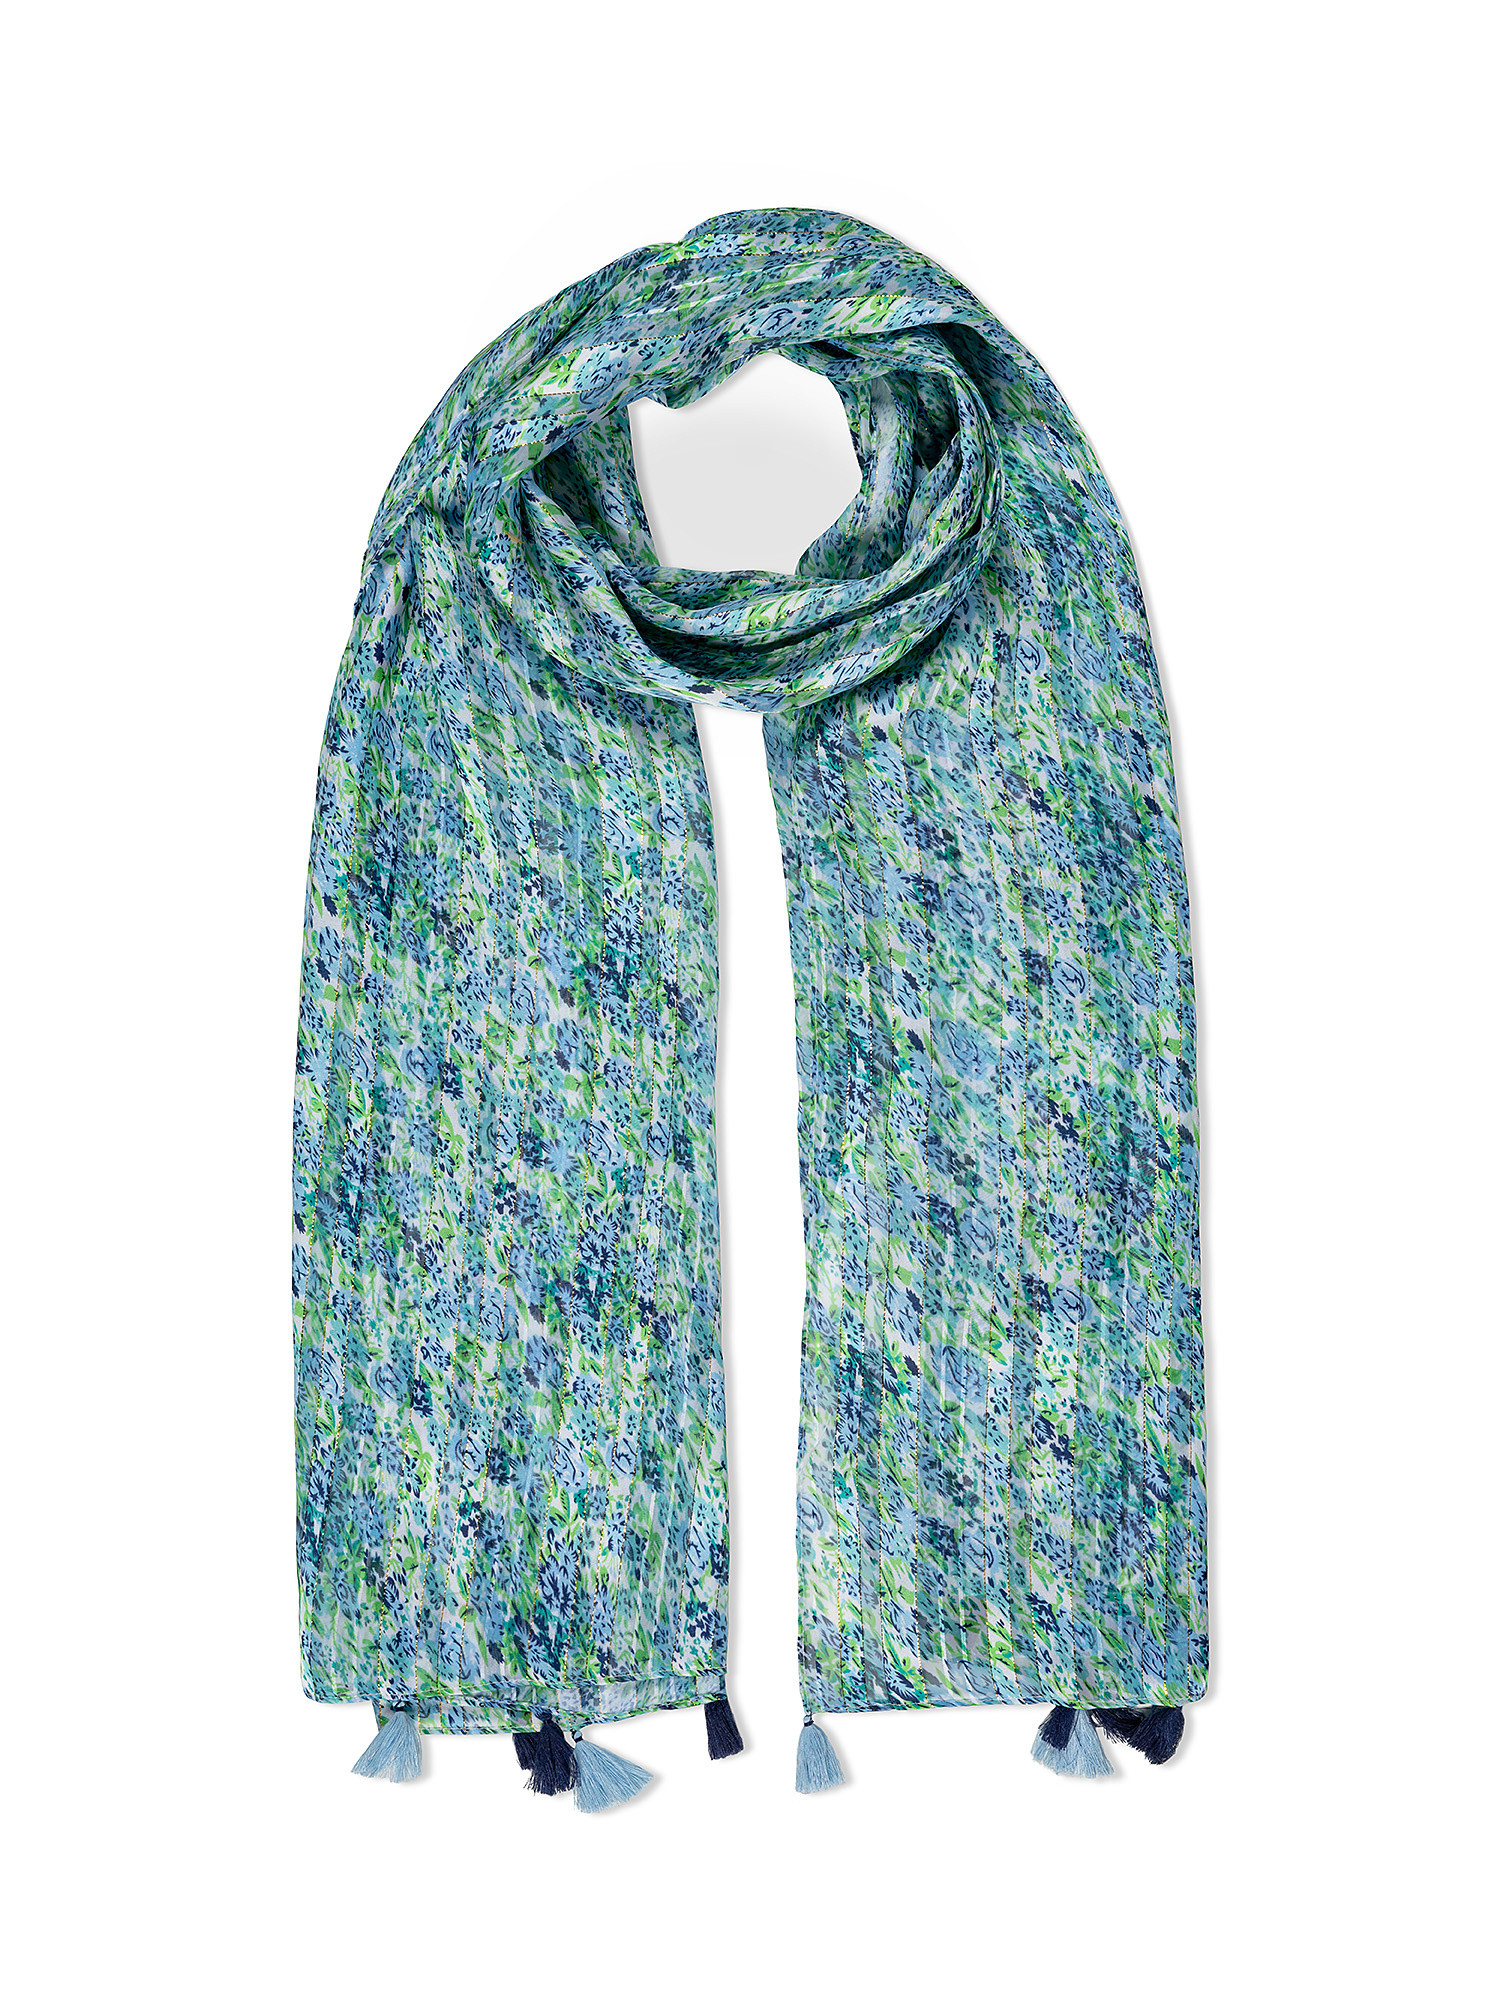 Koan - Patterned scarf with lurex, Blue, large image number 0